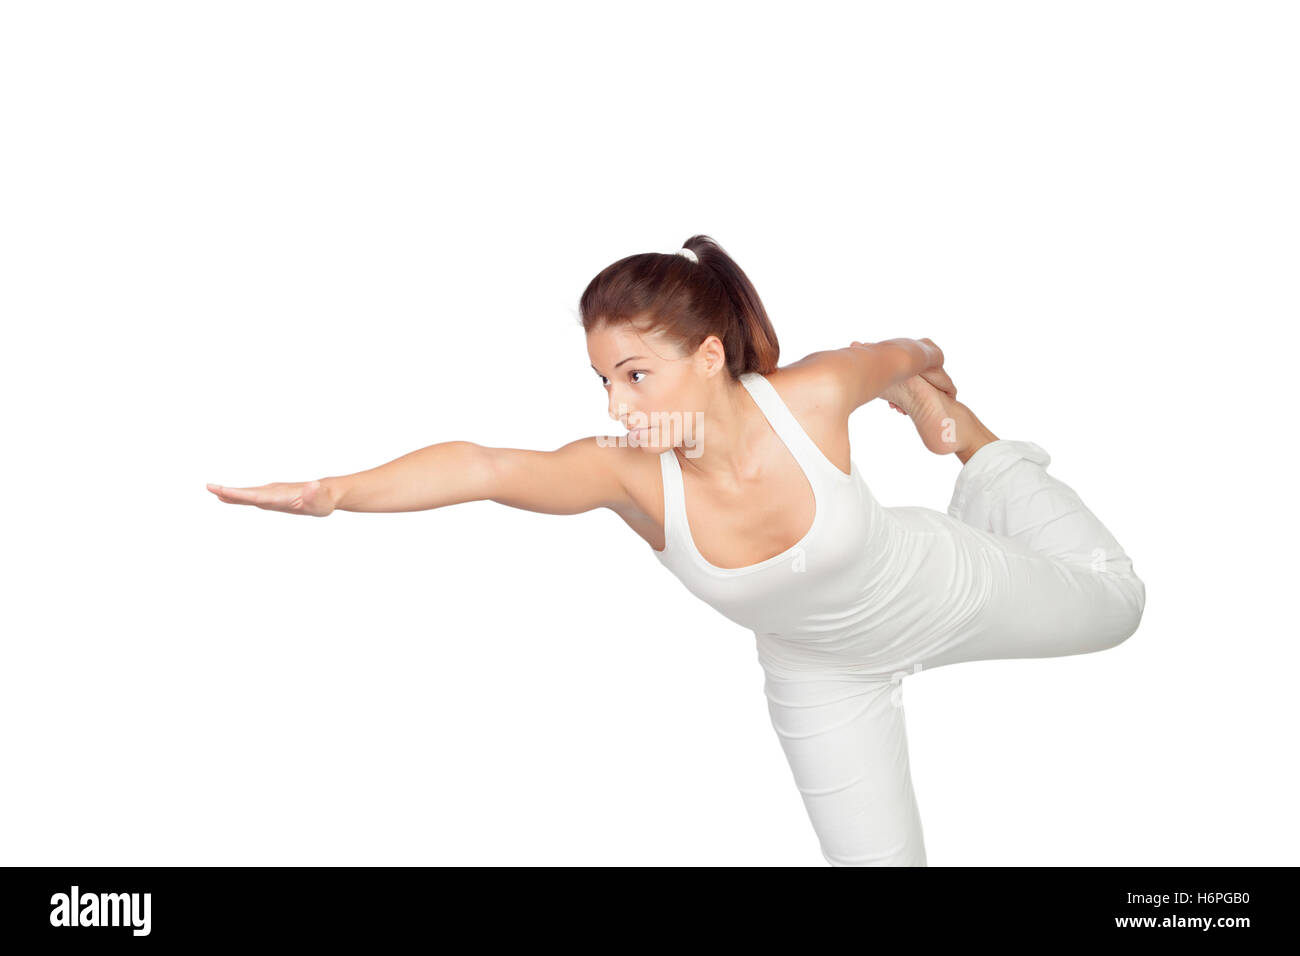 Brunette woman in white doing stretching isolated Stock Photo